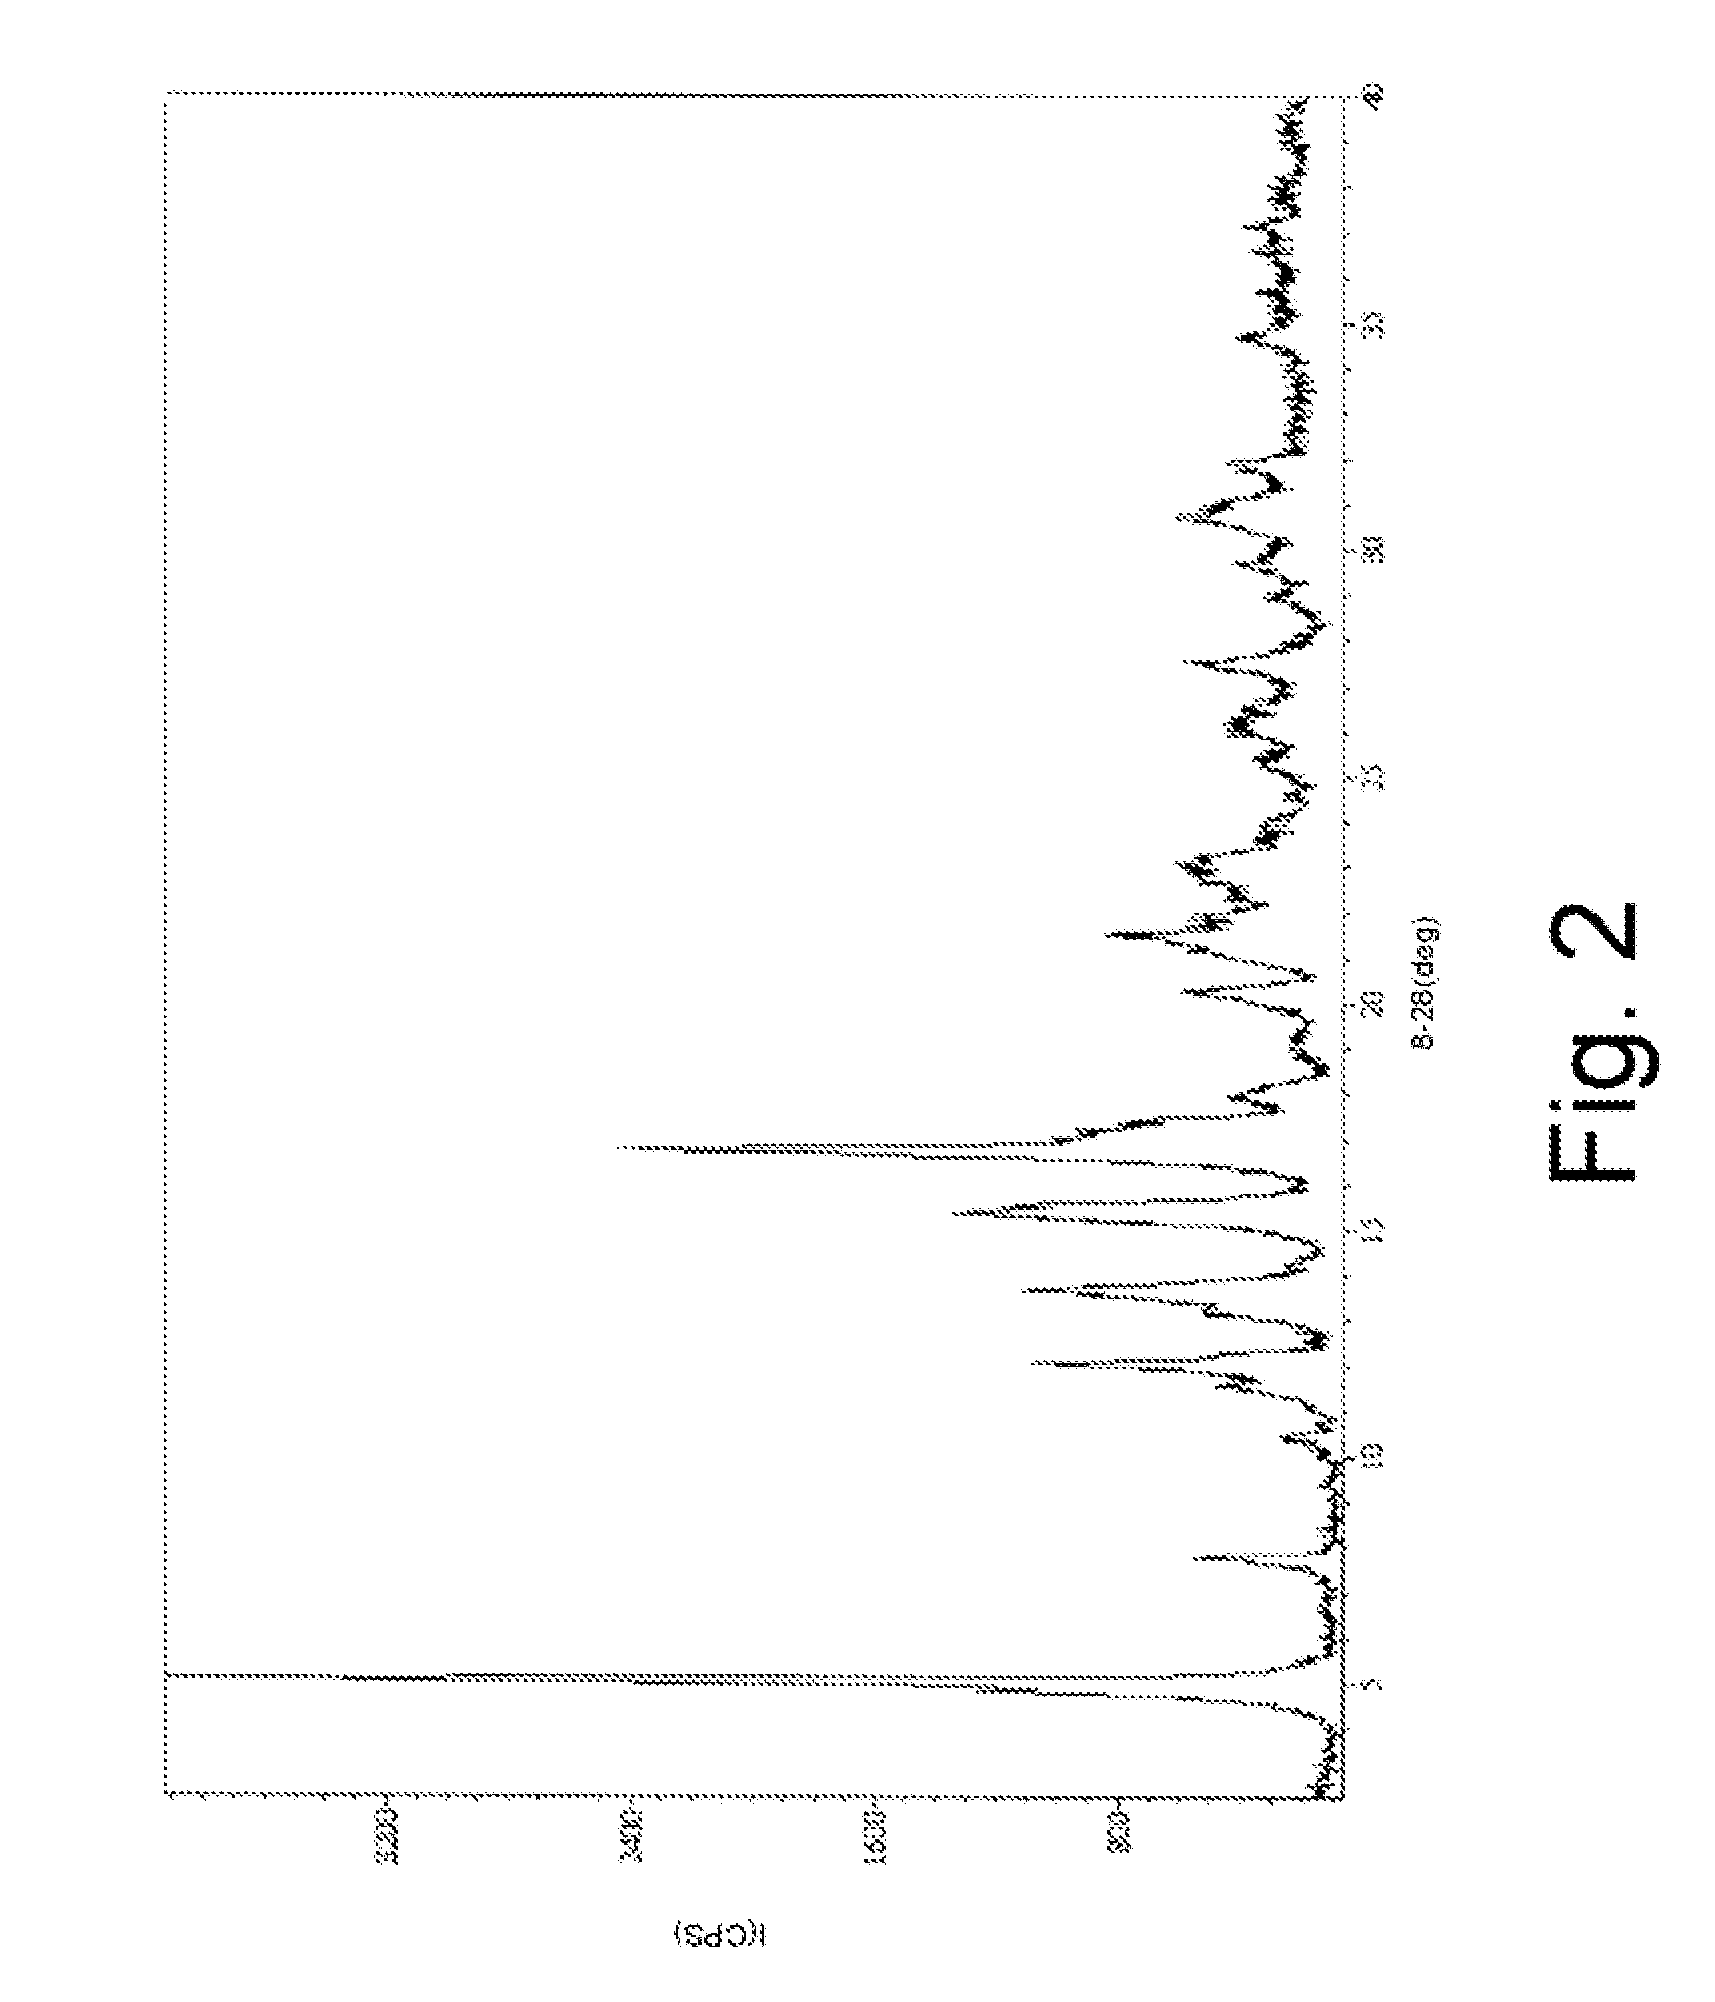 Synthetic sweetener compositions with improved temporal profile and/or flavor profile, methods for their formulation, and uses